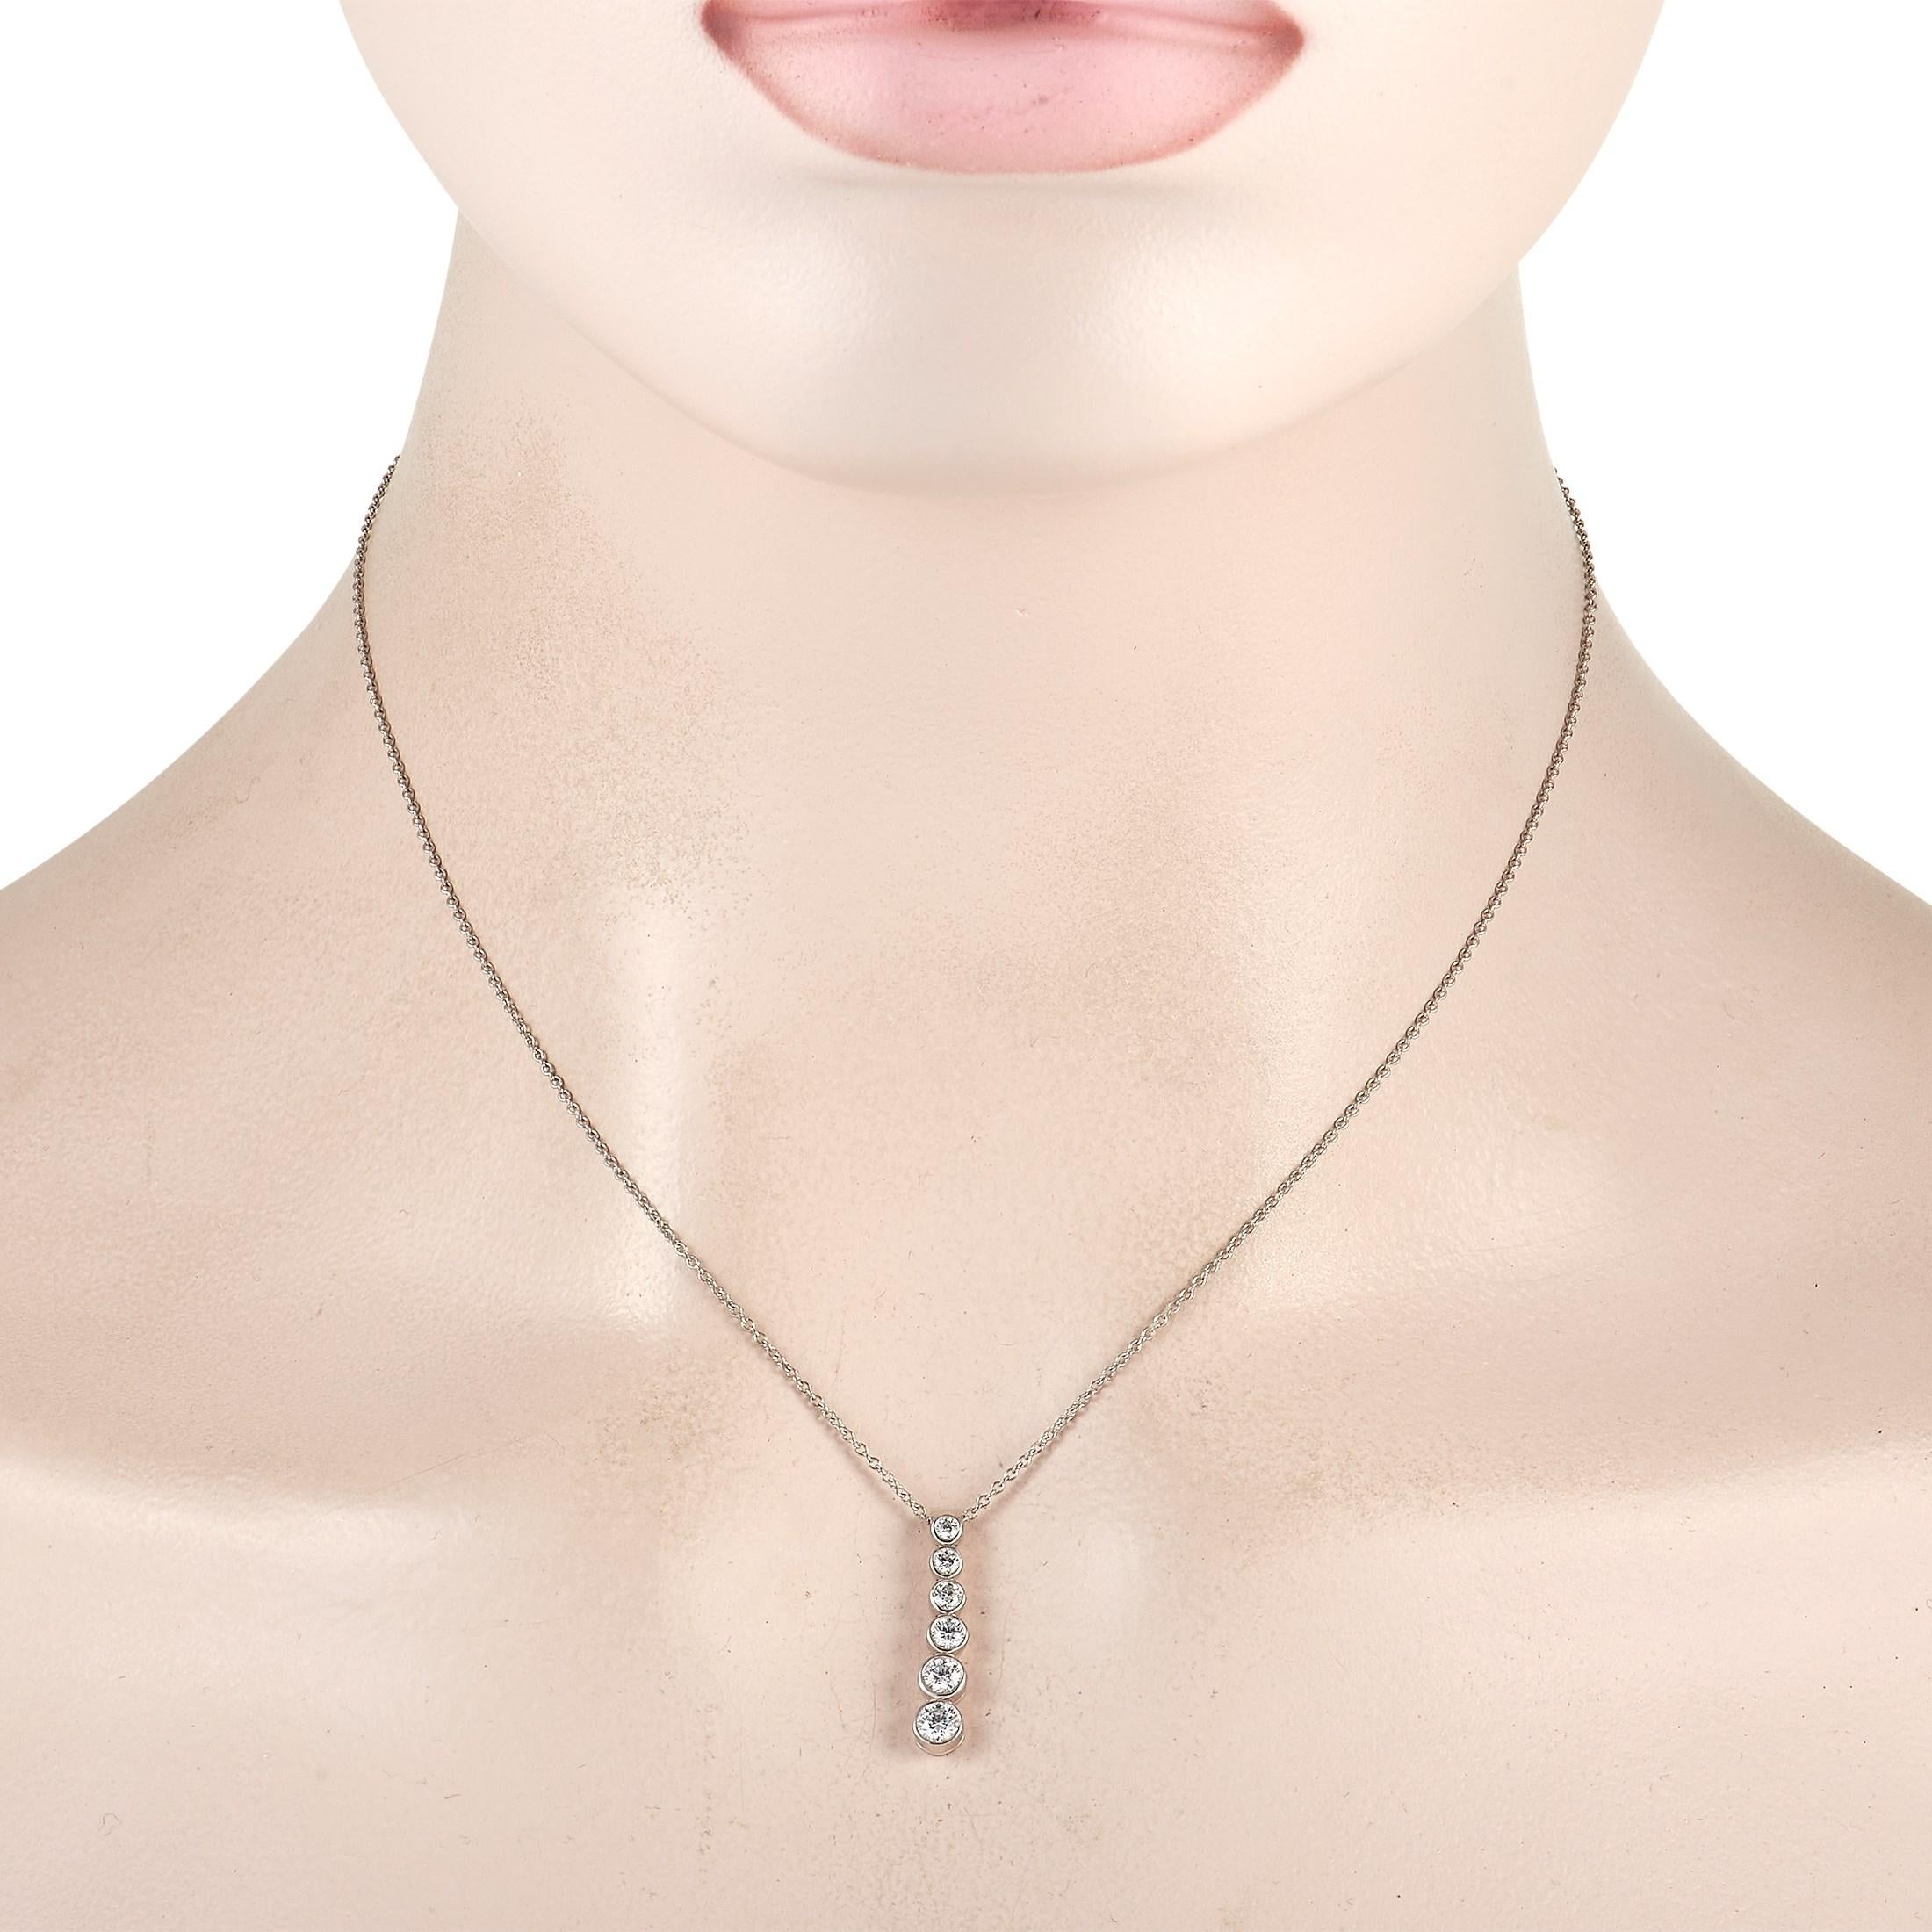 Subtle yet sparkly, you can't go wrong with the timeless appeal of this necklace. The Tiffany & Co. Jazz Platinum 0.70 Diamond Drop Pendant Necklace features a 16-inch long chain holding an approximately 0.15